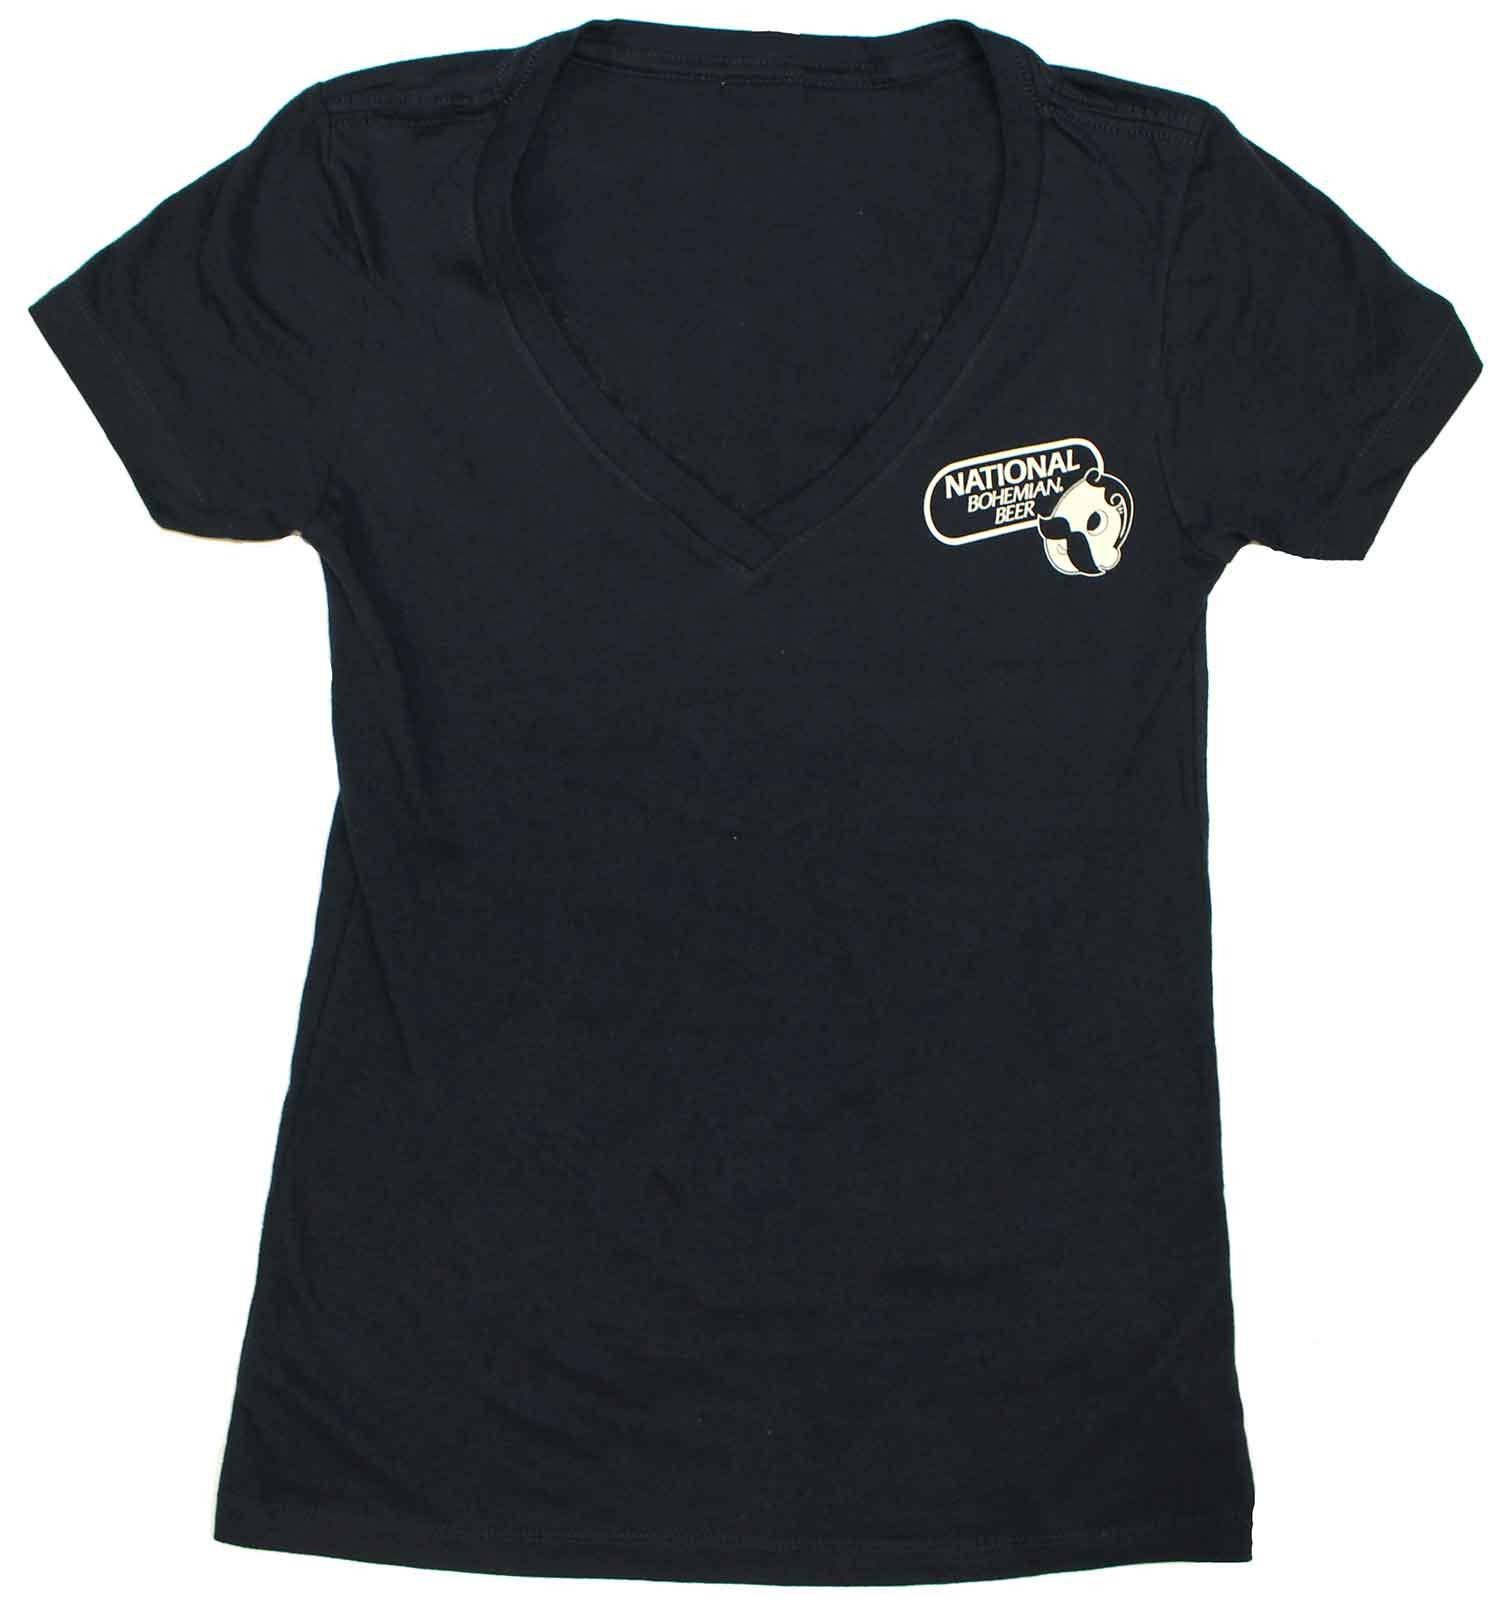 Boh Say Can You See (Midnight Navy) / Ladies V-Neck Shirt - Route One Apparel